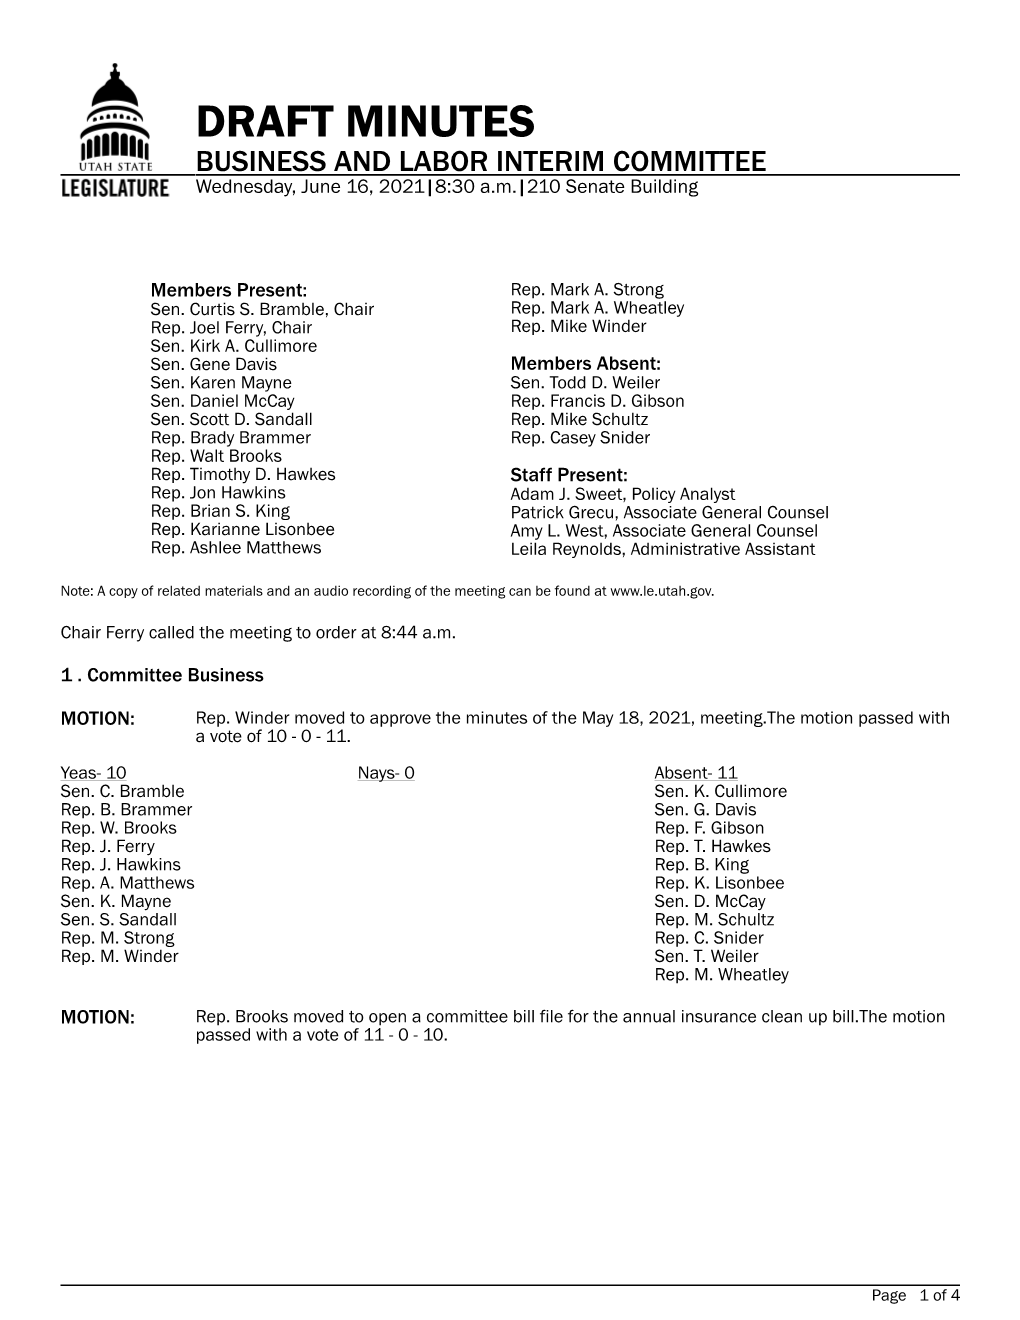 DRAFT MINUTES BUSINESS and LABOR INTERIM COMMITTEE Wednesday, June 16, 2021|8:30 A.M.|210 Senate Building